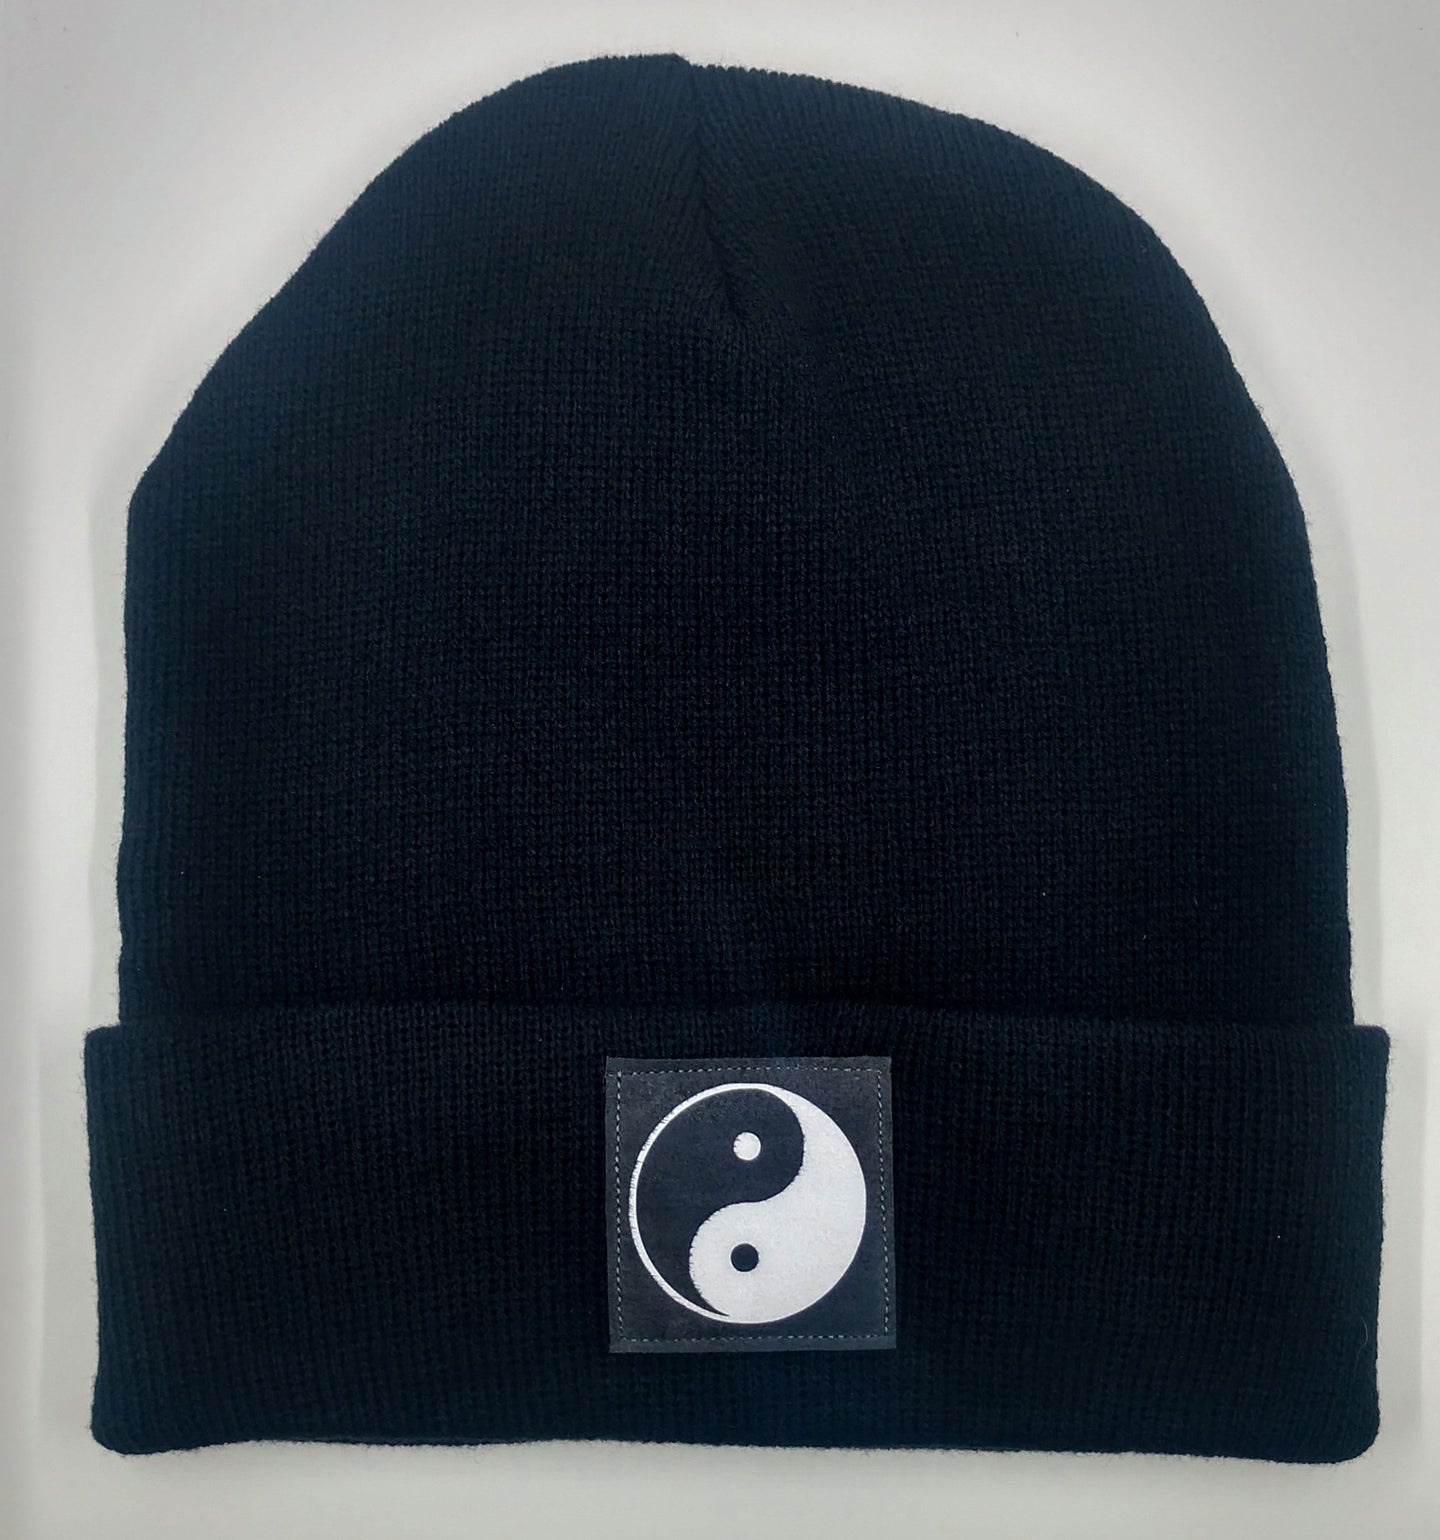 Beanie with black yin yang over your third eye by Buddha Gear